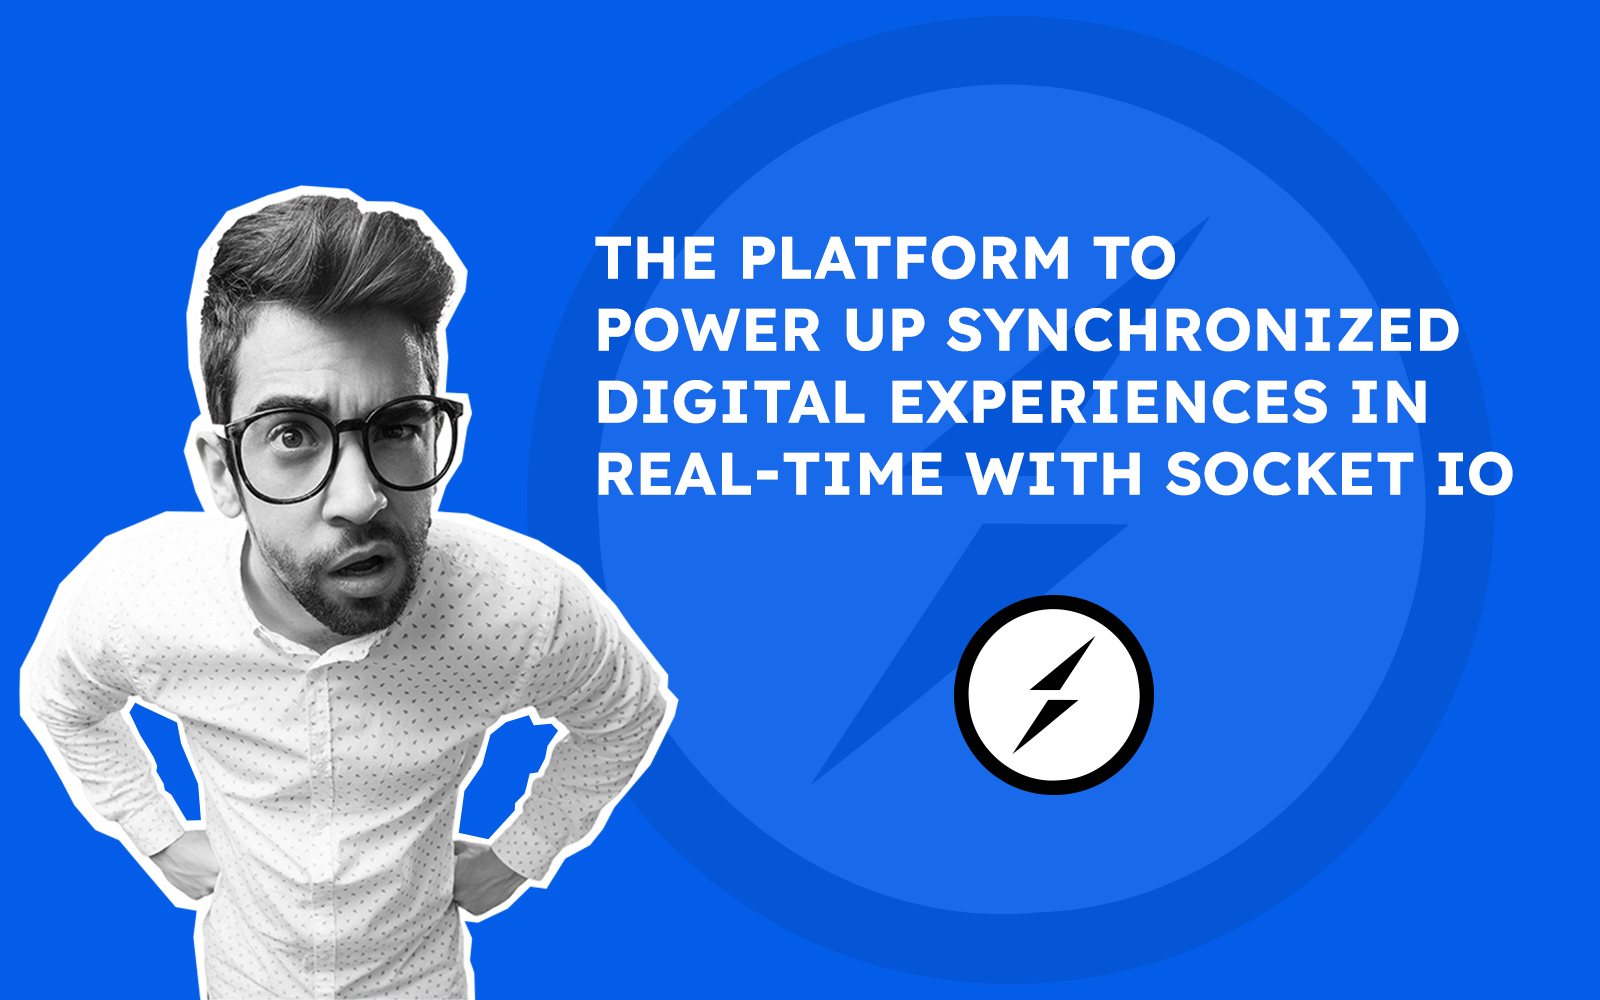 The Platform To Power up Synchronized Digital Experiences In Real-Time With Socket io